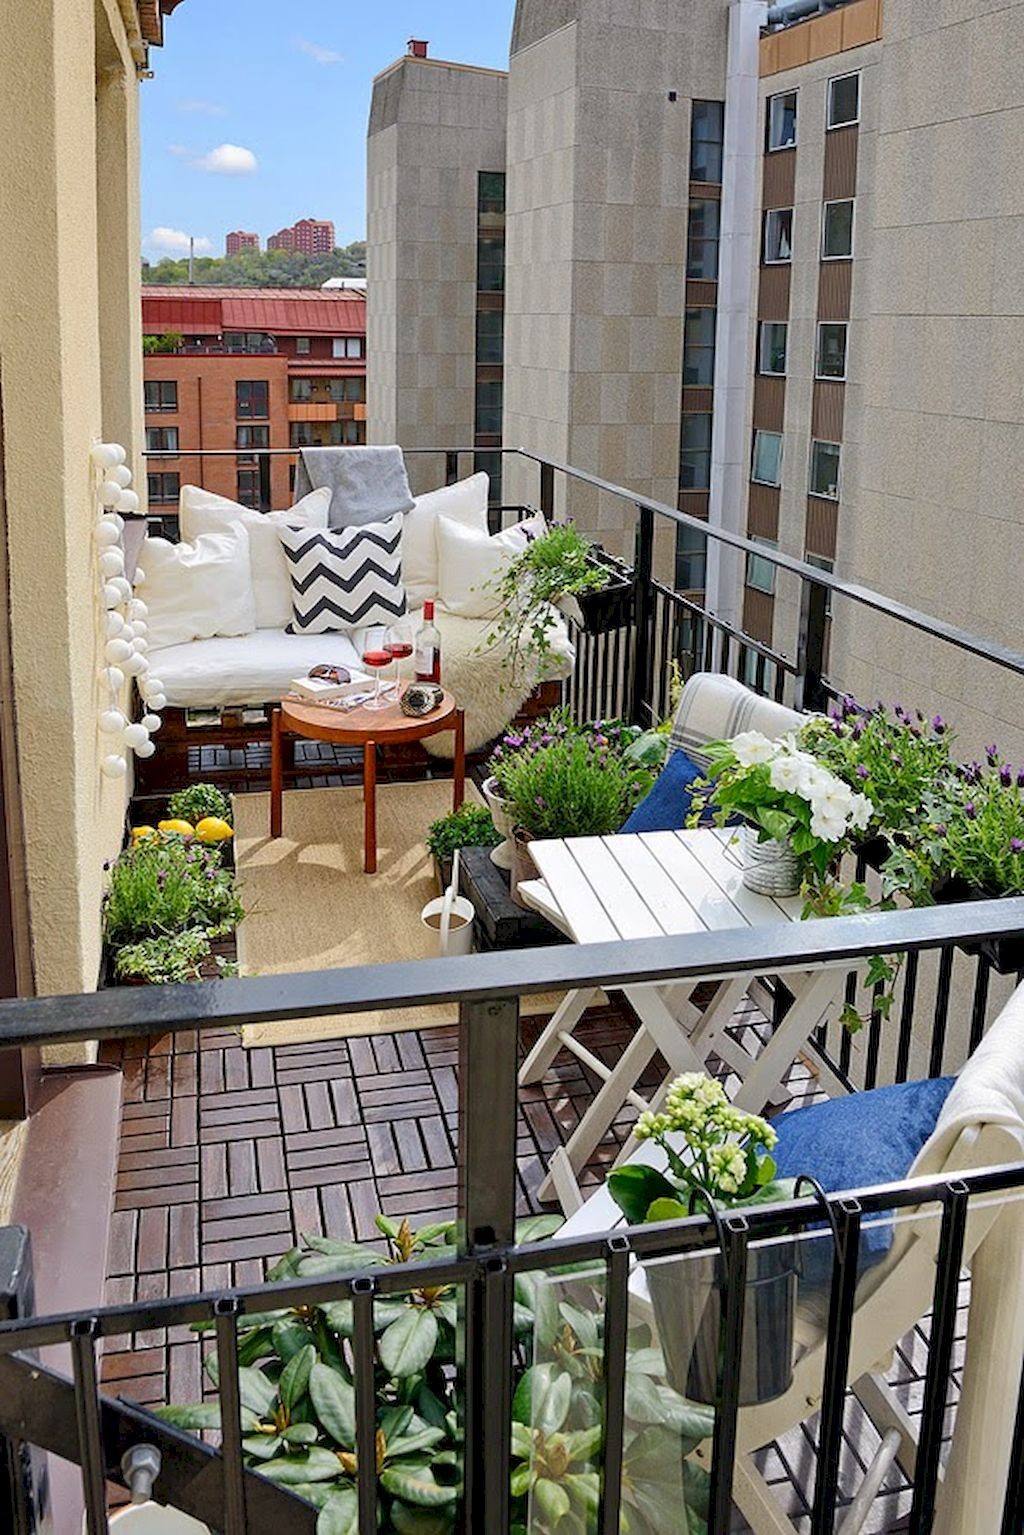 Best Decorated Small Outdoor Balconies' Inspirational Images